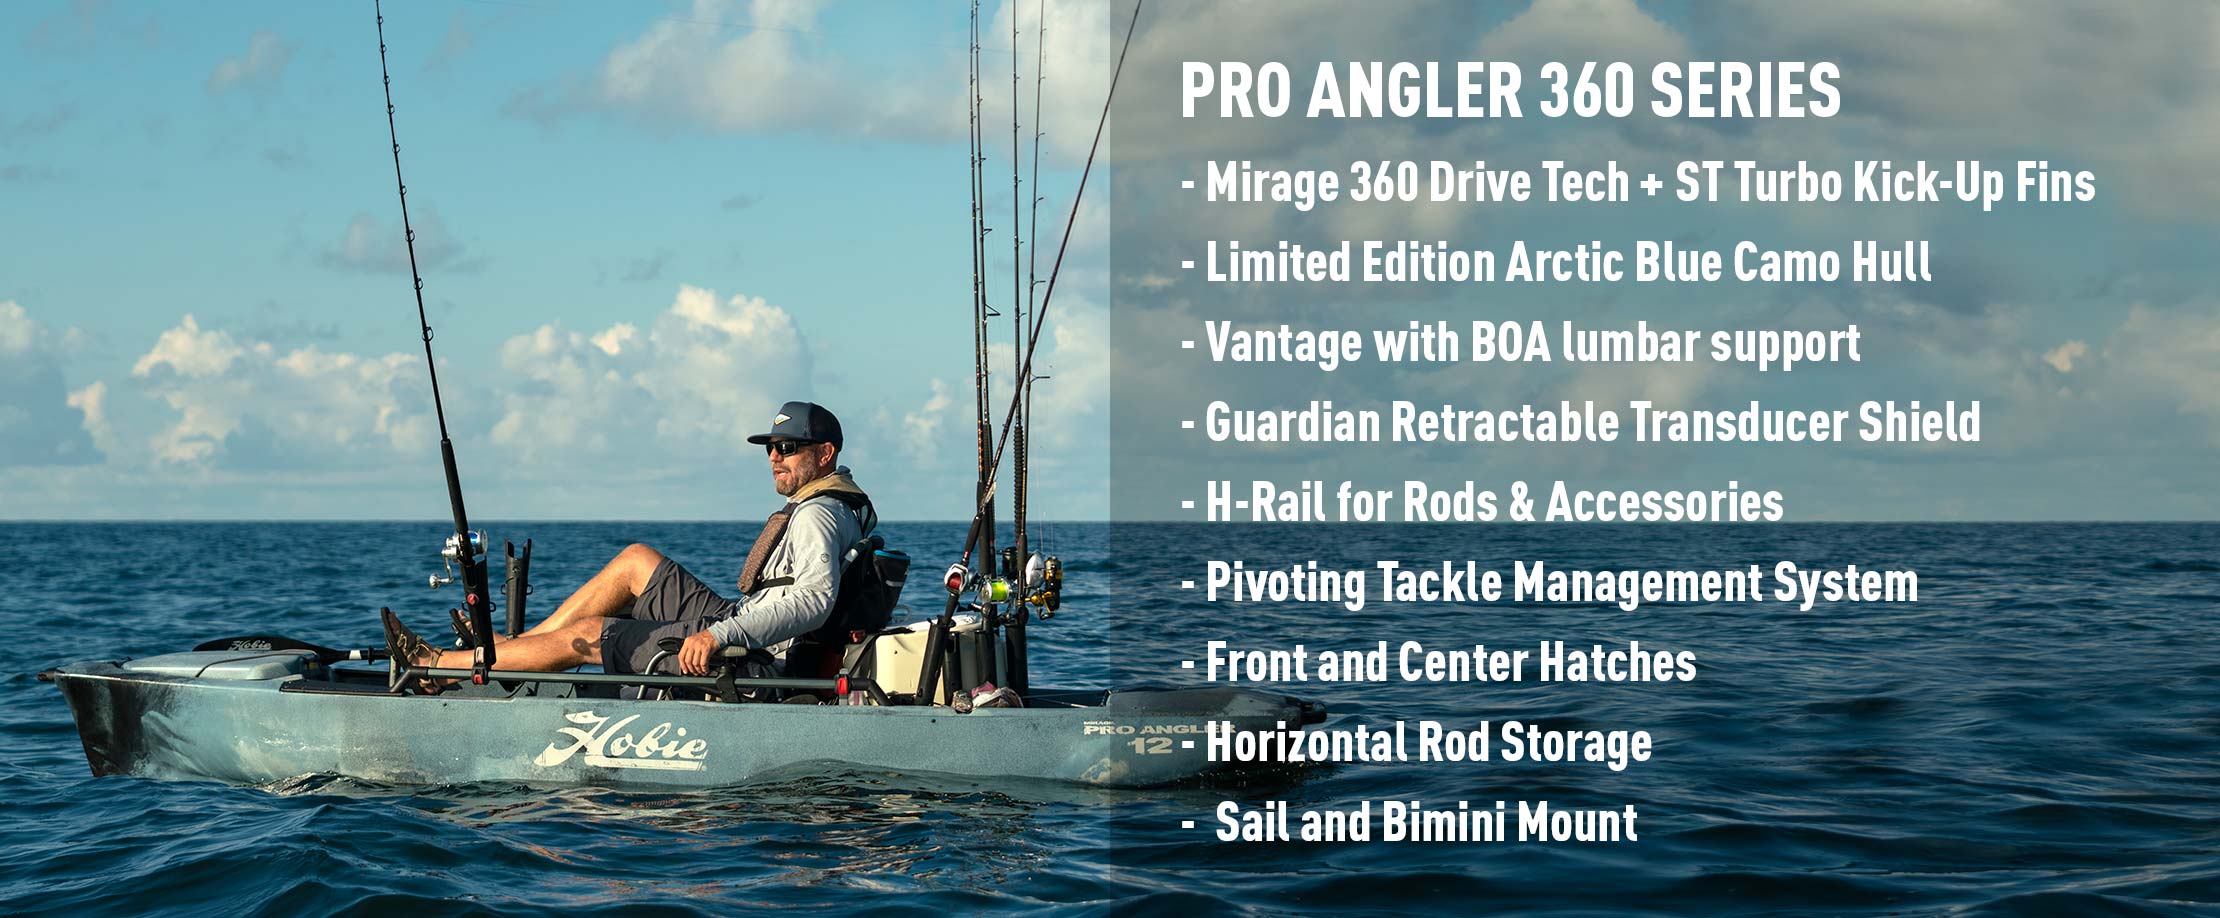 Mirage Pro Angler 12 with 360 Drive Technology Features